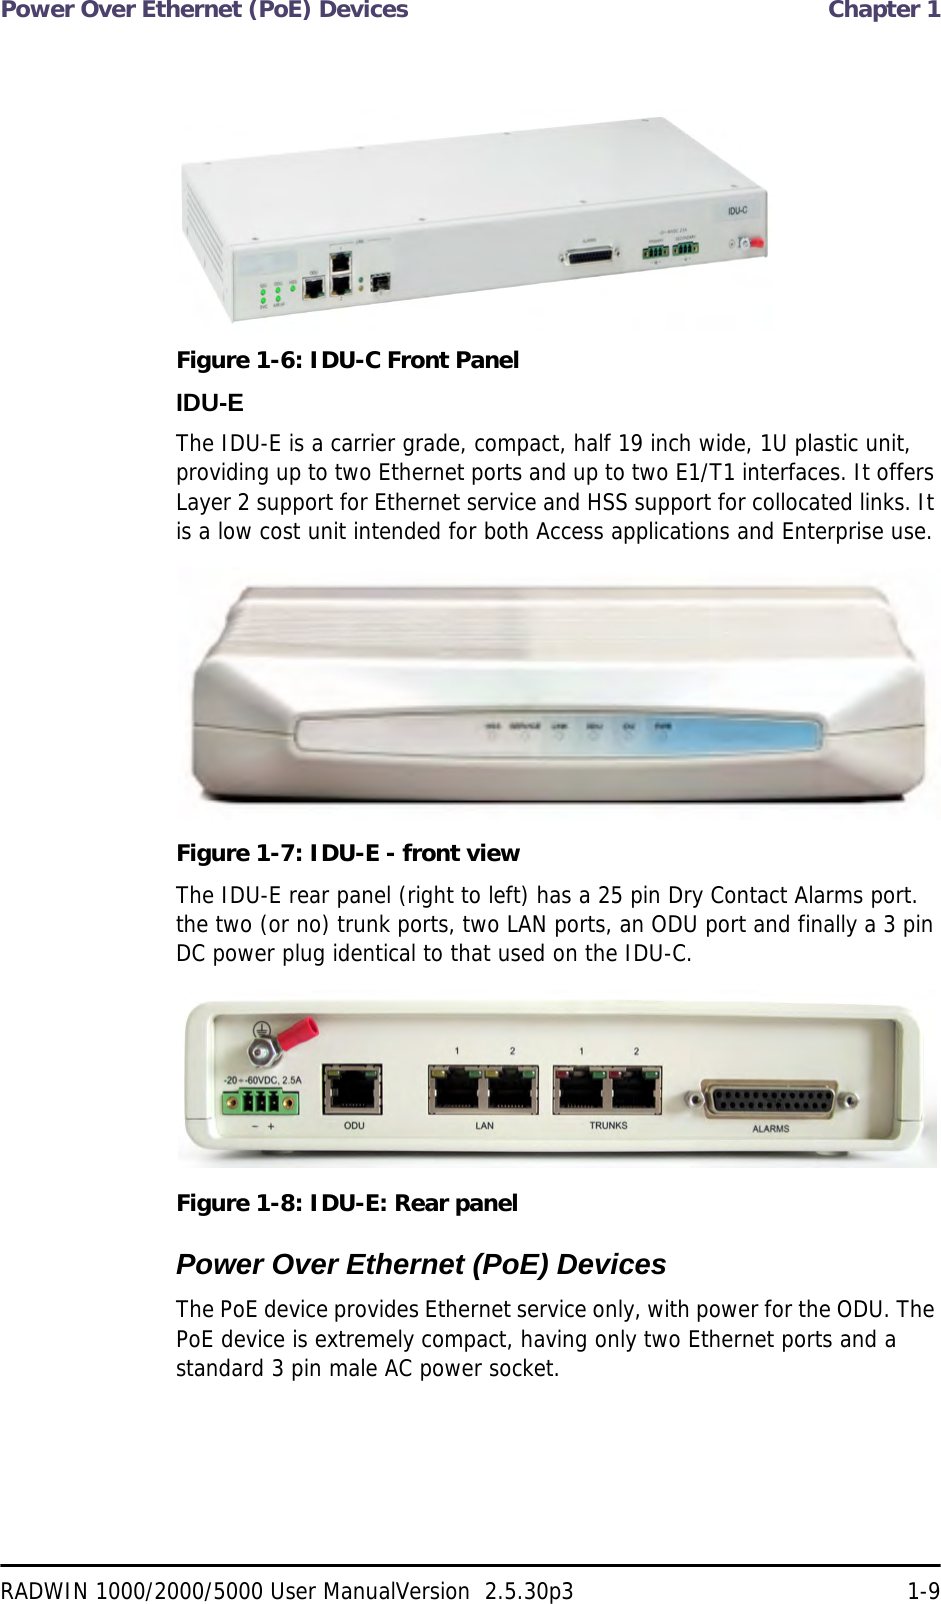 Power Over Ethernet (PoE) Devices  Chapter 1RADWIN 1000/2000/5000 User ManualVersion  2.5.30p3 1-9Figure 1-6: IDU-C Front PanelIDU-EThe IDU-E is a carrier grade, compact, half 19 inch wide, 1U plastic unit, providing up to two Ethernet ports and up to two E1/T1 interfaces. It offers Layer 2 support for Ethernet service and HSS support for collocated links. It is a low cost unit intended for both Access applications and Enterprise use.Figure 1-7: IDU-E - front viewThe IDU-E rear panel (right to left) has a 25 pin Dry Contact Alarms port. the two (or no) trunk ports, two LAN ports, an ODU port and finally a 3 pin DC power plug identical to that used on the IDU-C.Figure 1-8: IDU-E: Rear panelPower Over Ethernet (PoE) DevicesThe PoE device provides Ethernet service only, with power for the ODU. The PoE device is extremely compact, having only two Ethernet ports and a standard 3 pin male AC power socket.